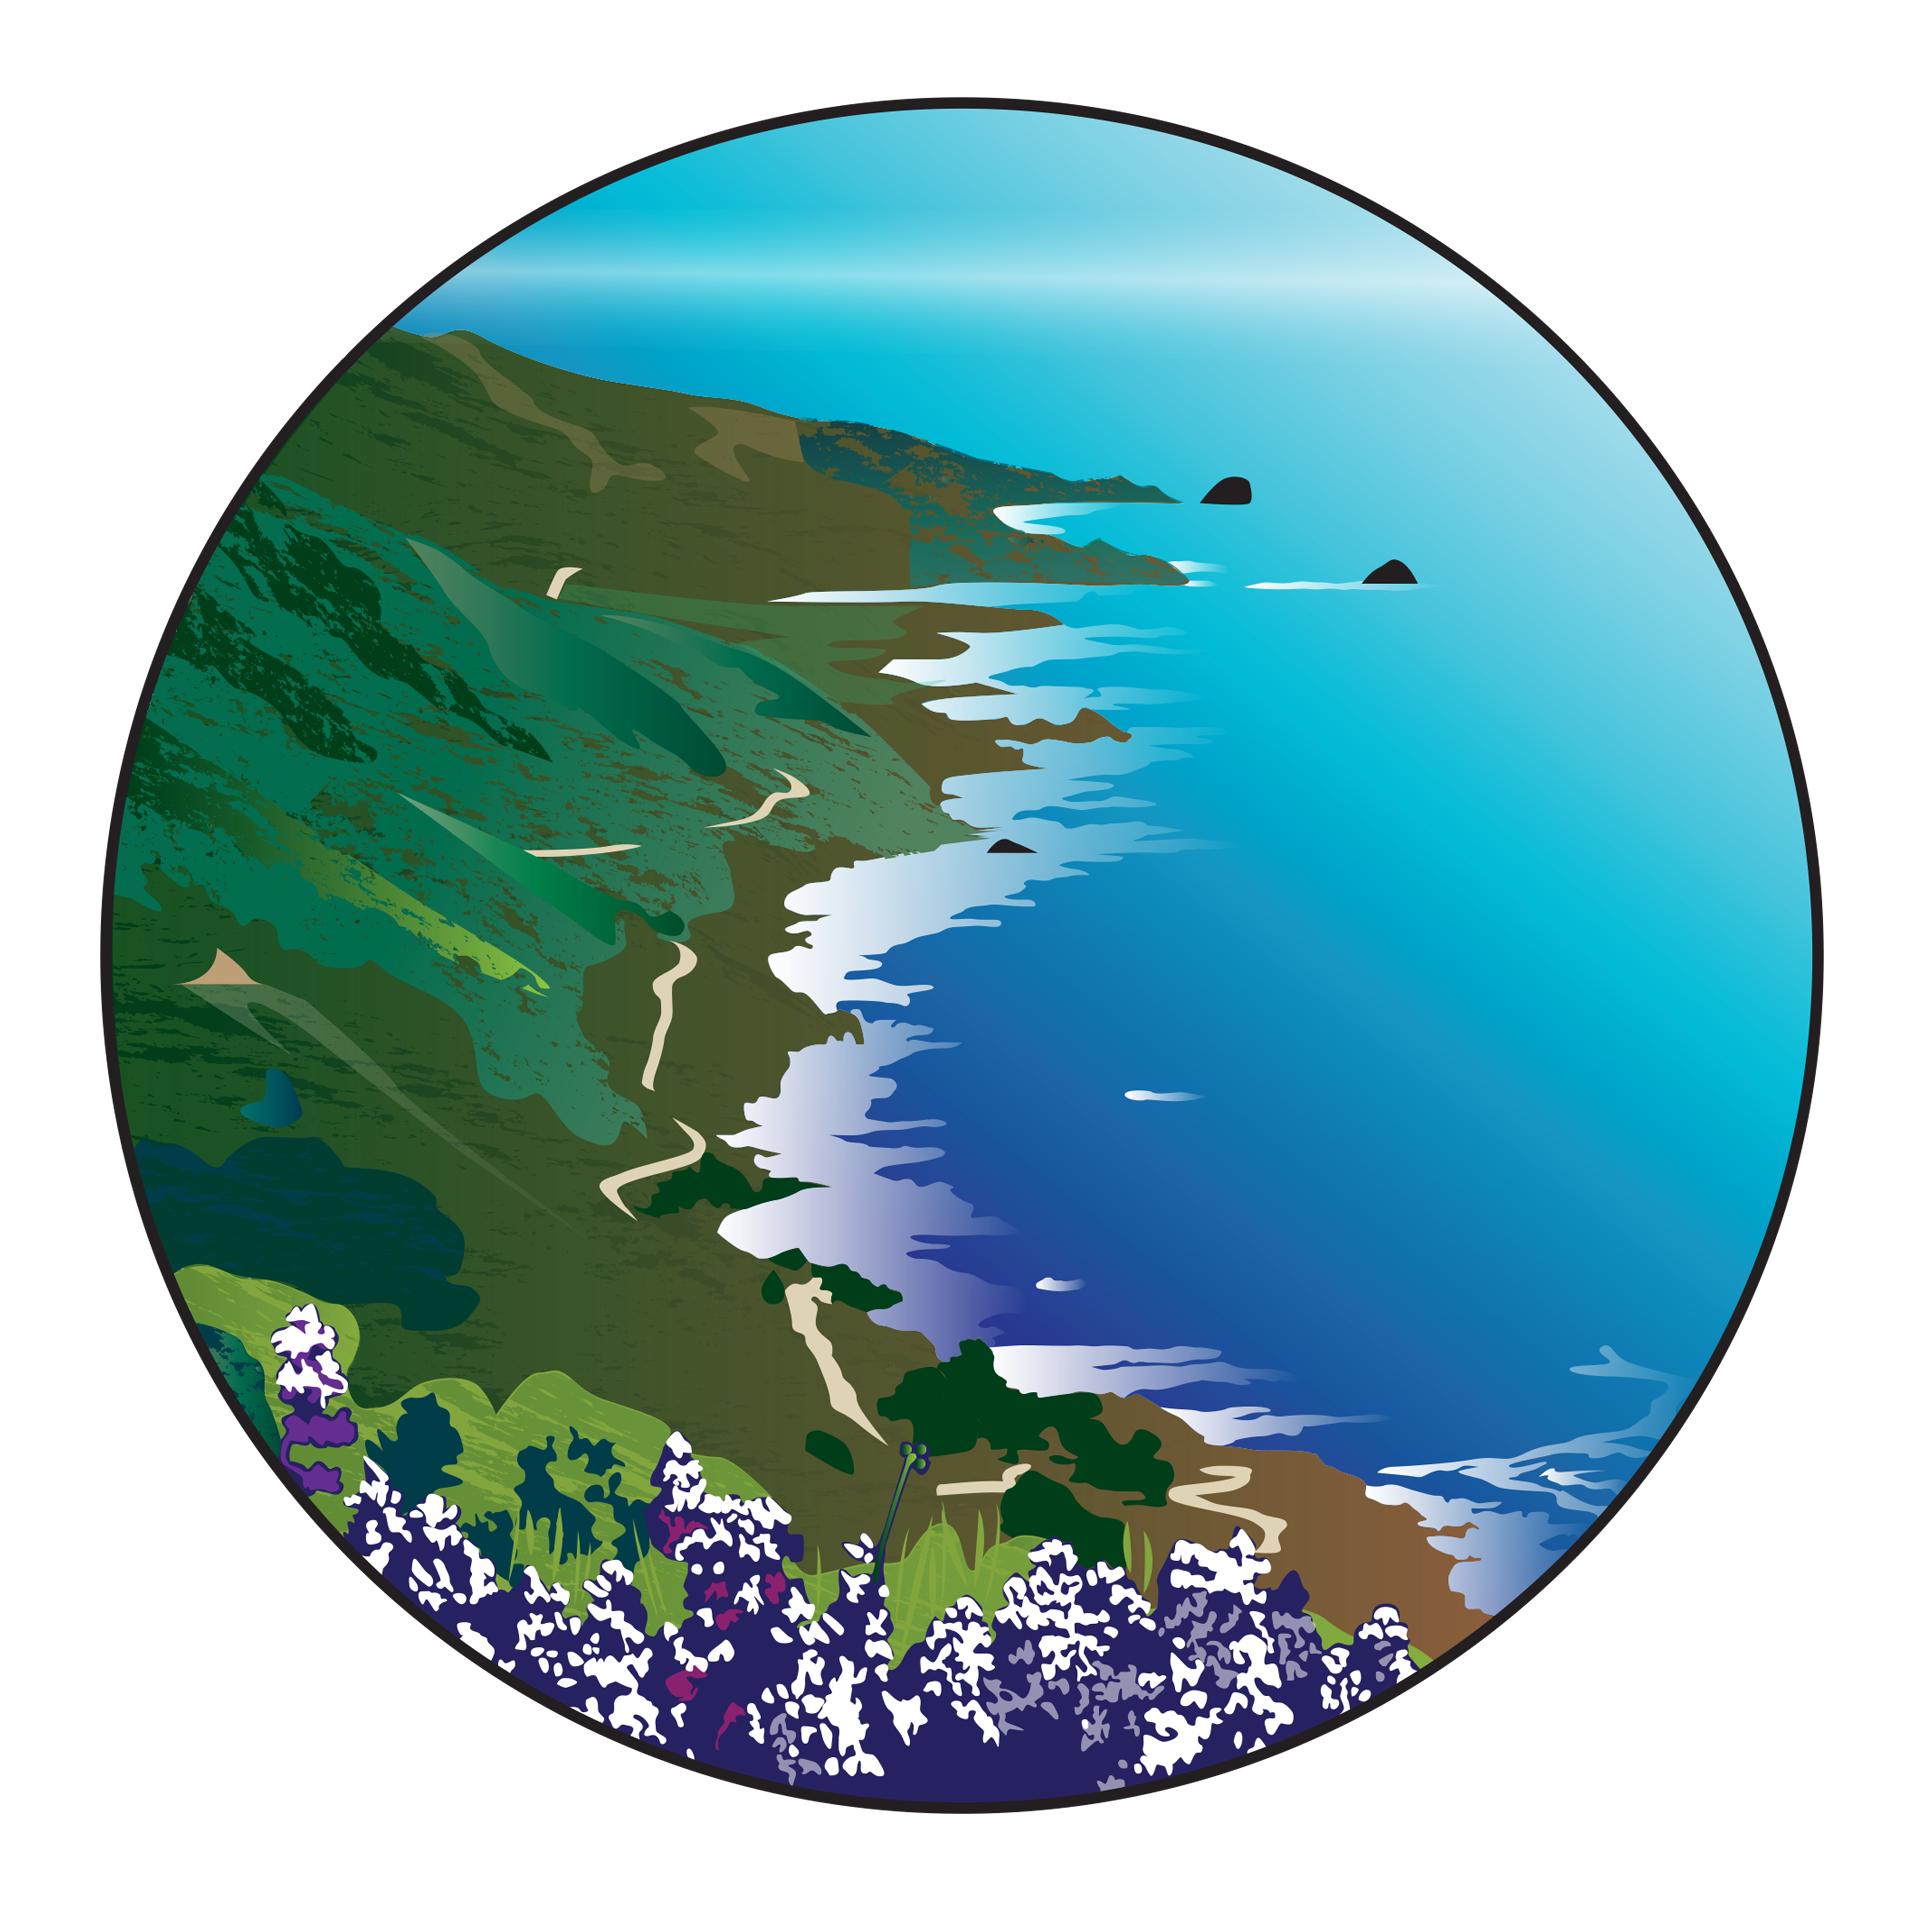 An illustrated image of a California Pacific Ocean coastline with green hills in the background and purple lavender in the forefront of the image.